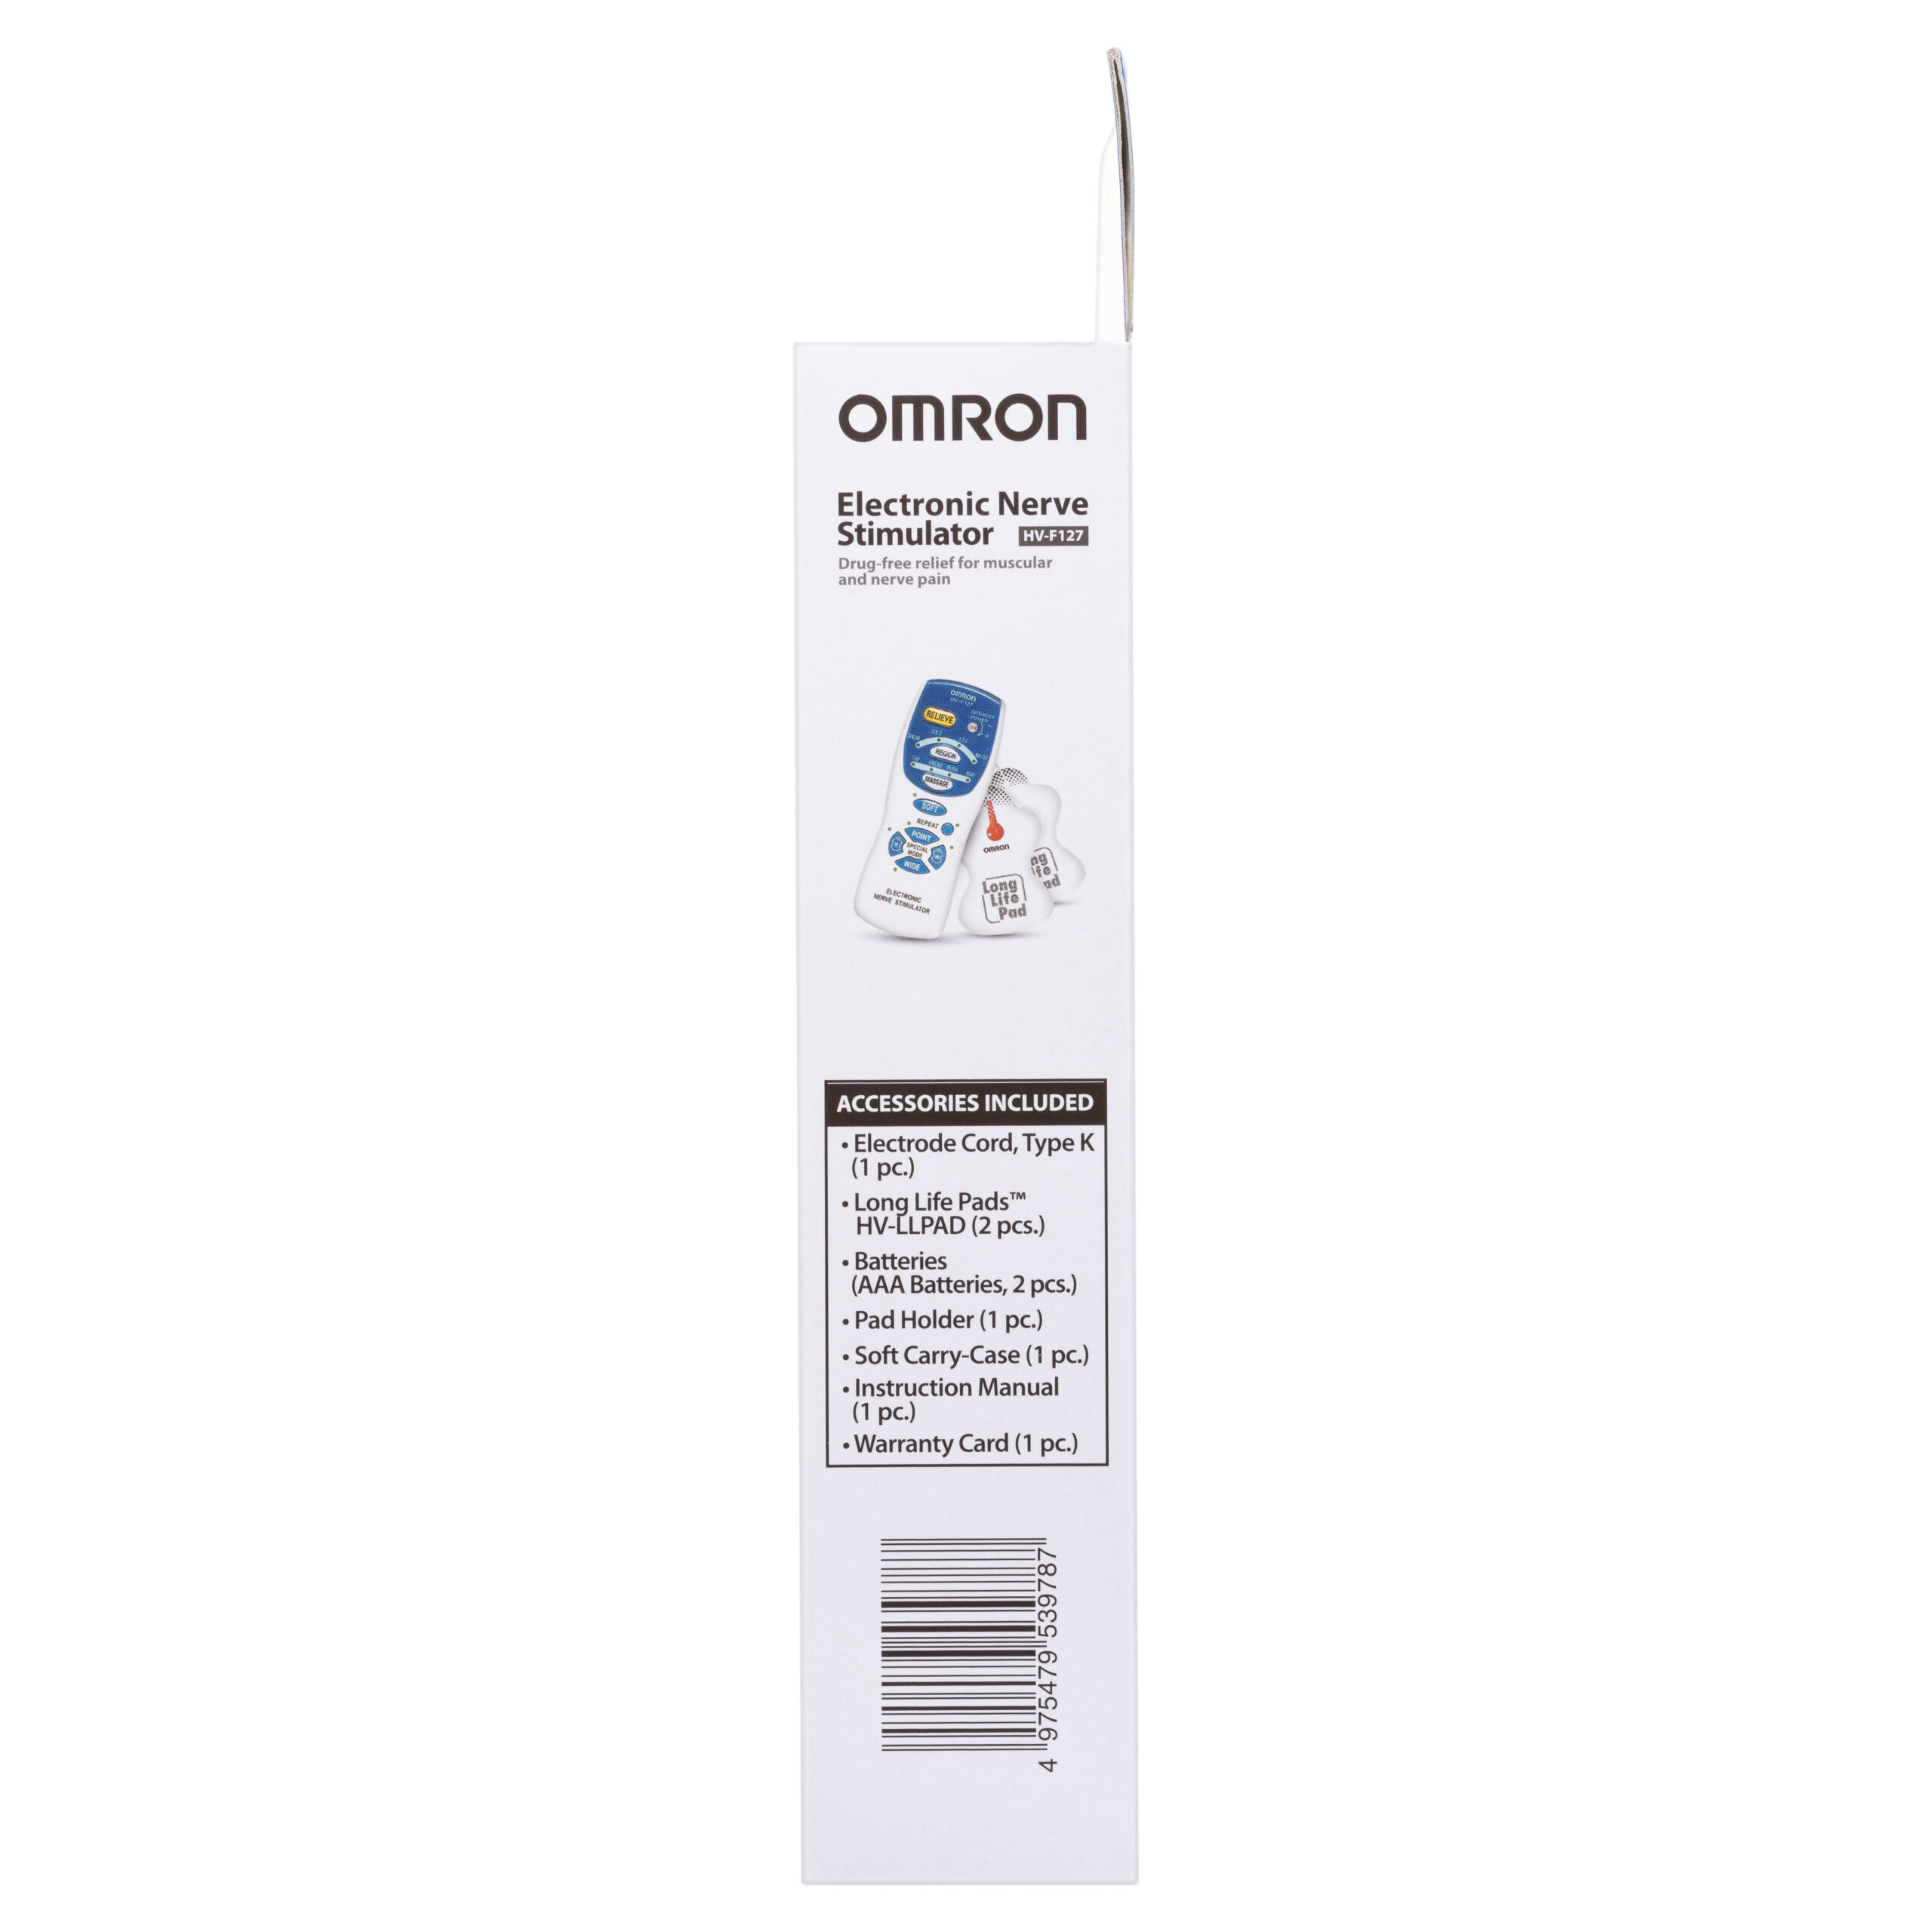 https://smartwellness.com.au/wp-content/uploads/2022/01/Omron-HVF127-TENS-Therapy-Device-Side-2-1-scaled.jpg